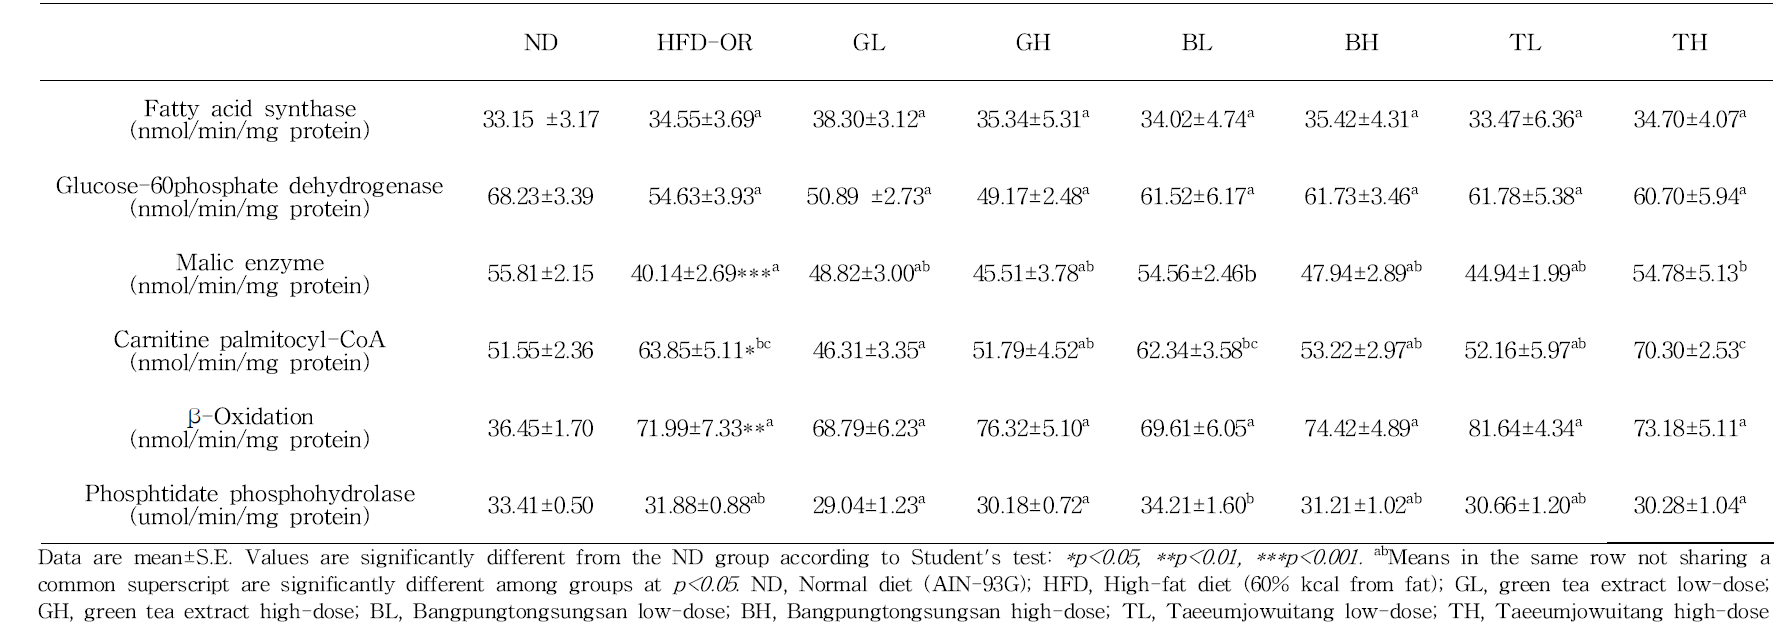 Effect of traditional medicinal prescription for 12 weeks on the hepatic lipid-regulating enzyme activities in C57BL/6J mice fed high-fat diet(Comparison with HFD-OR group)